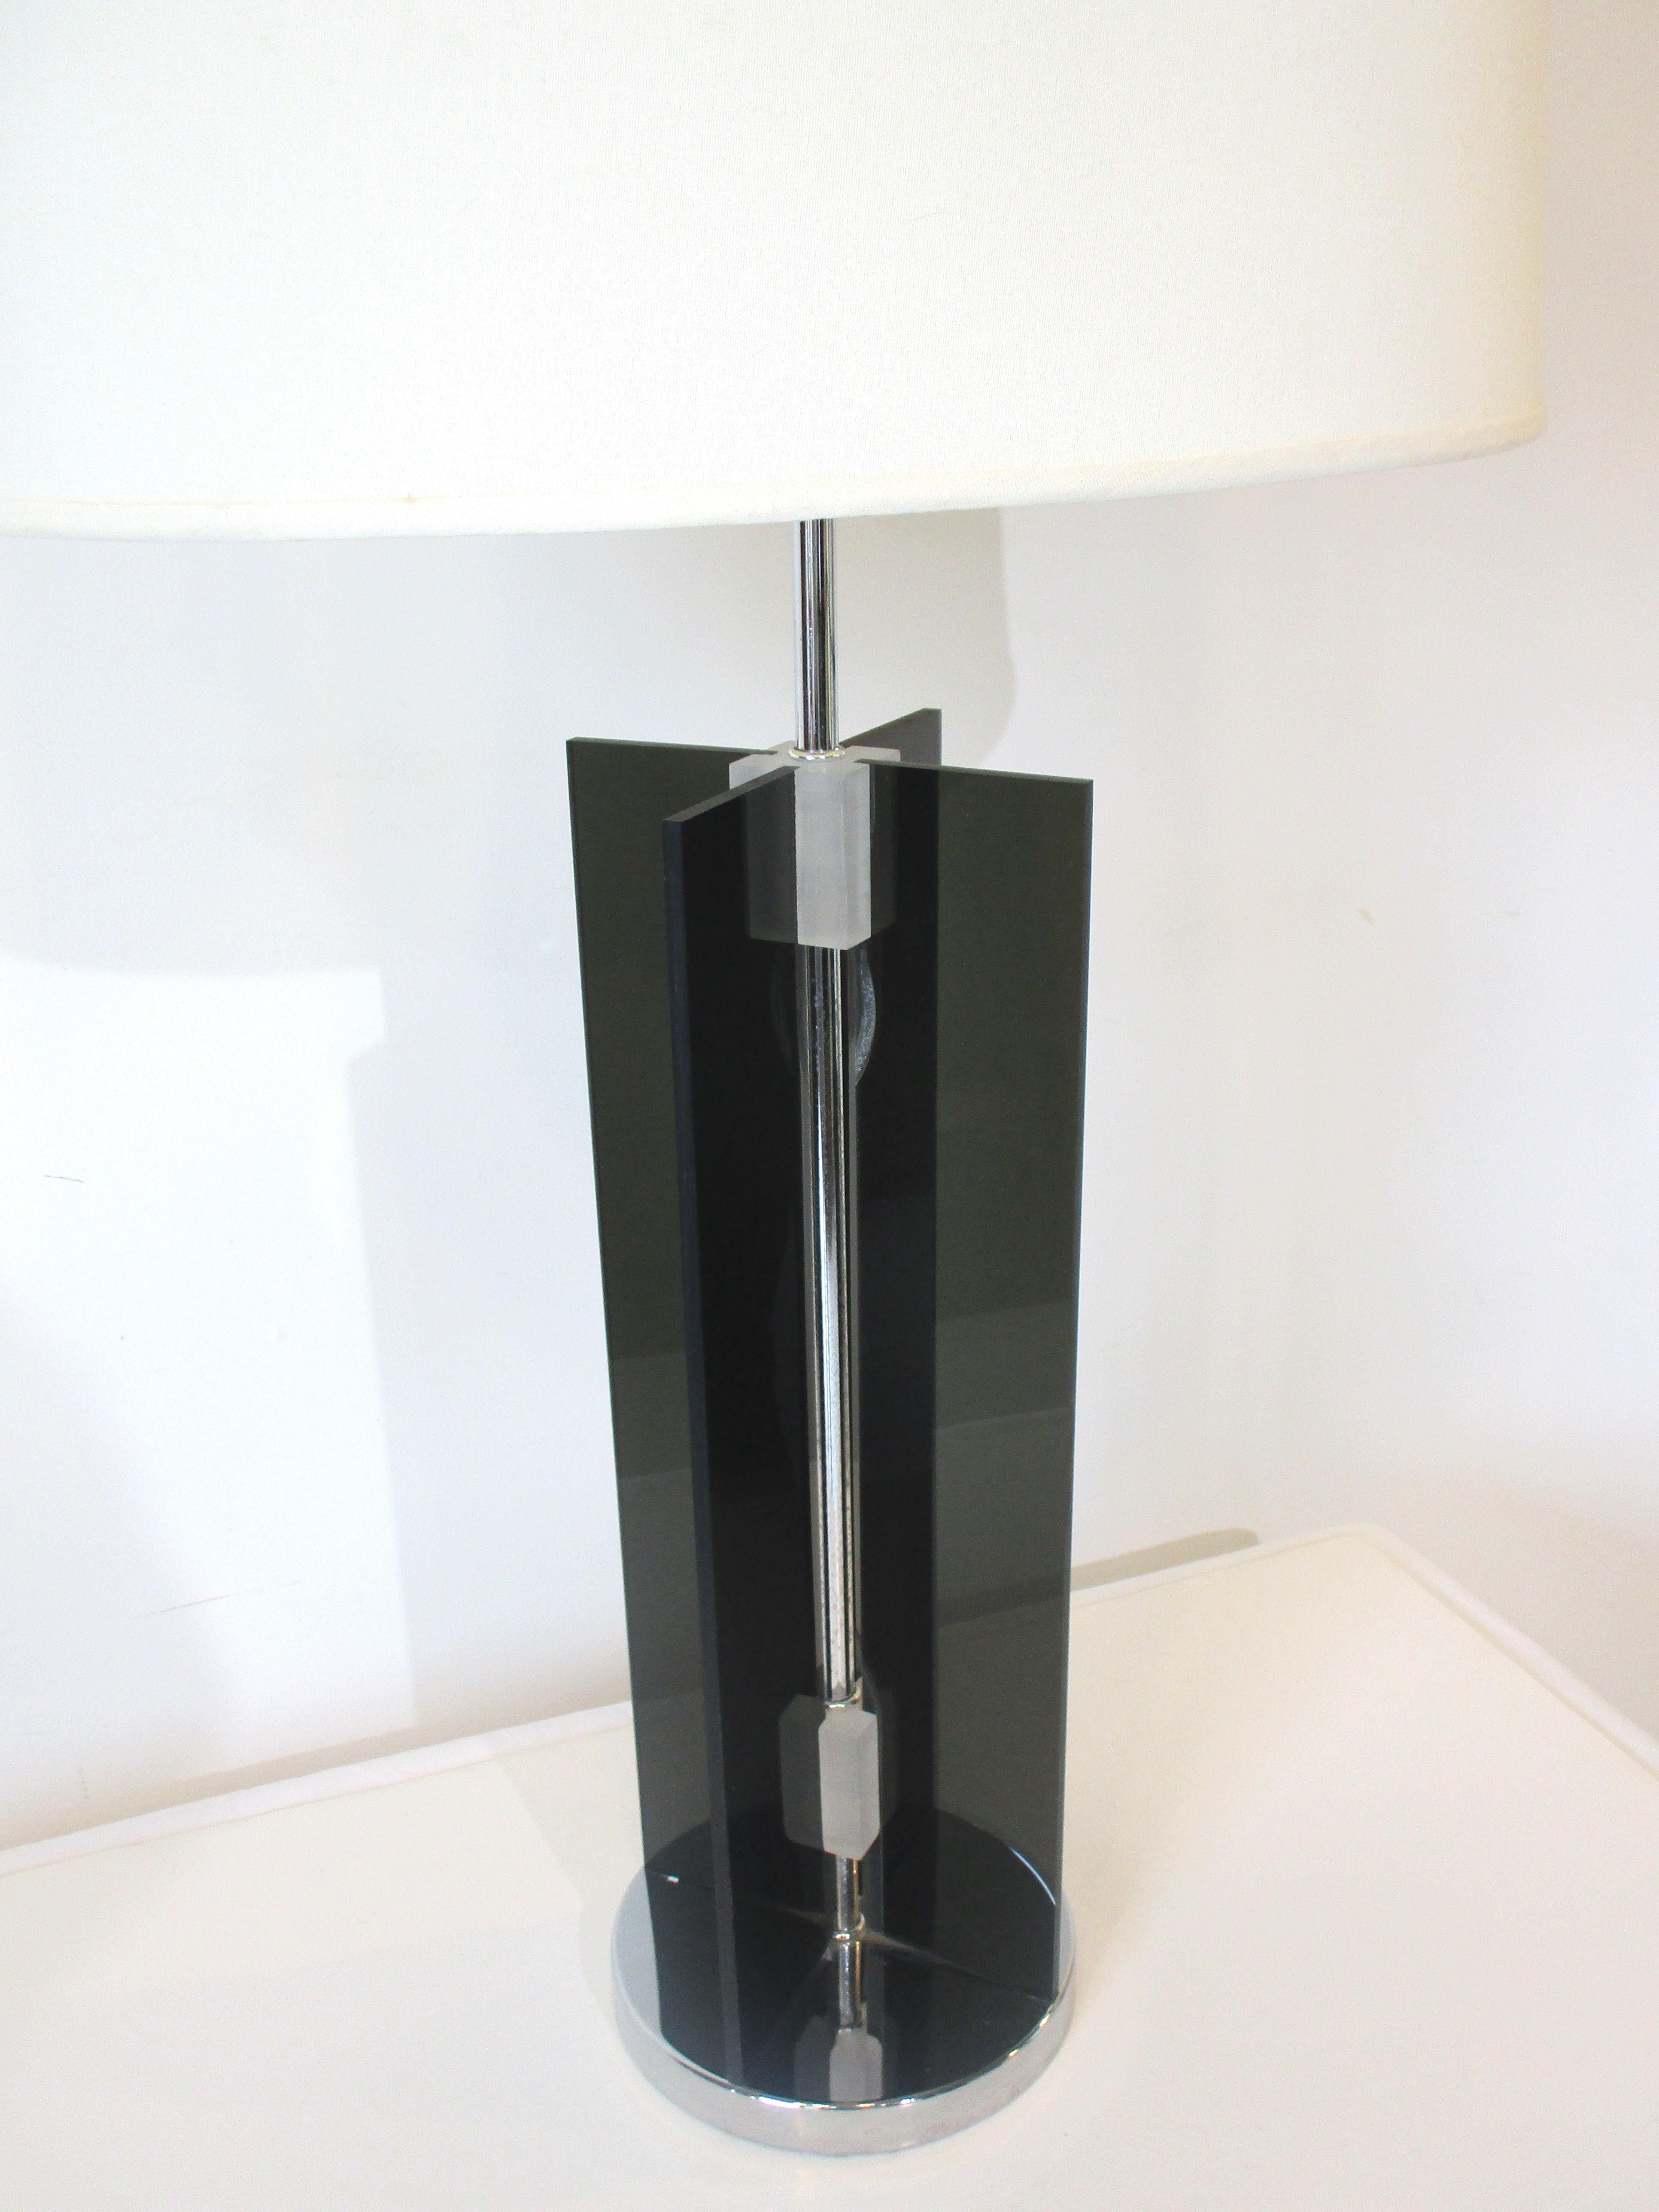 A smoked Lucite table lamp with a X shaped two planed body mounted on a chromed circular base. The body is held together by frosted Lucite rectangle pieces giving the lamp a great look, simple but also well crafted in the manner of Neal Smalls.